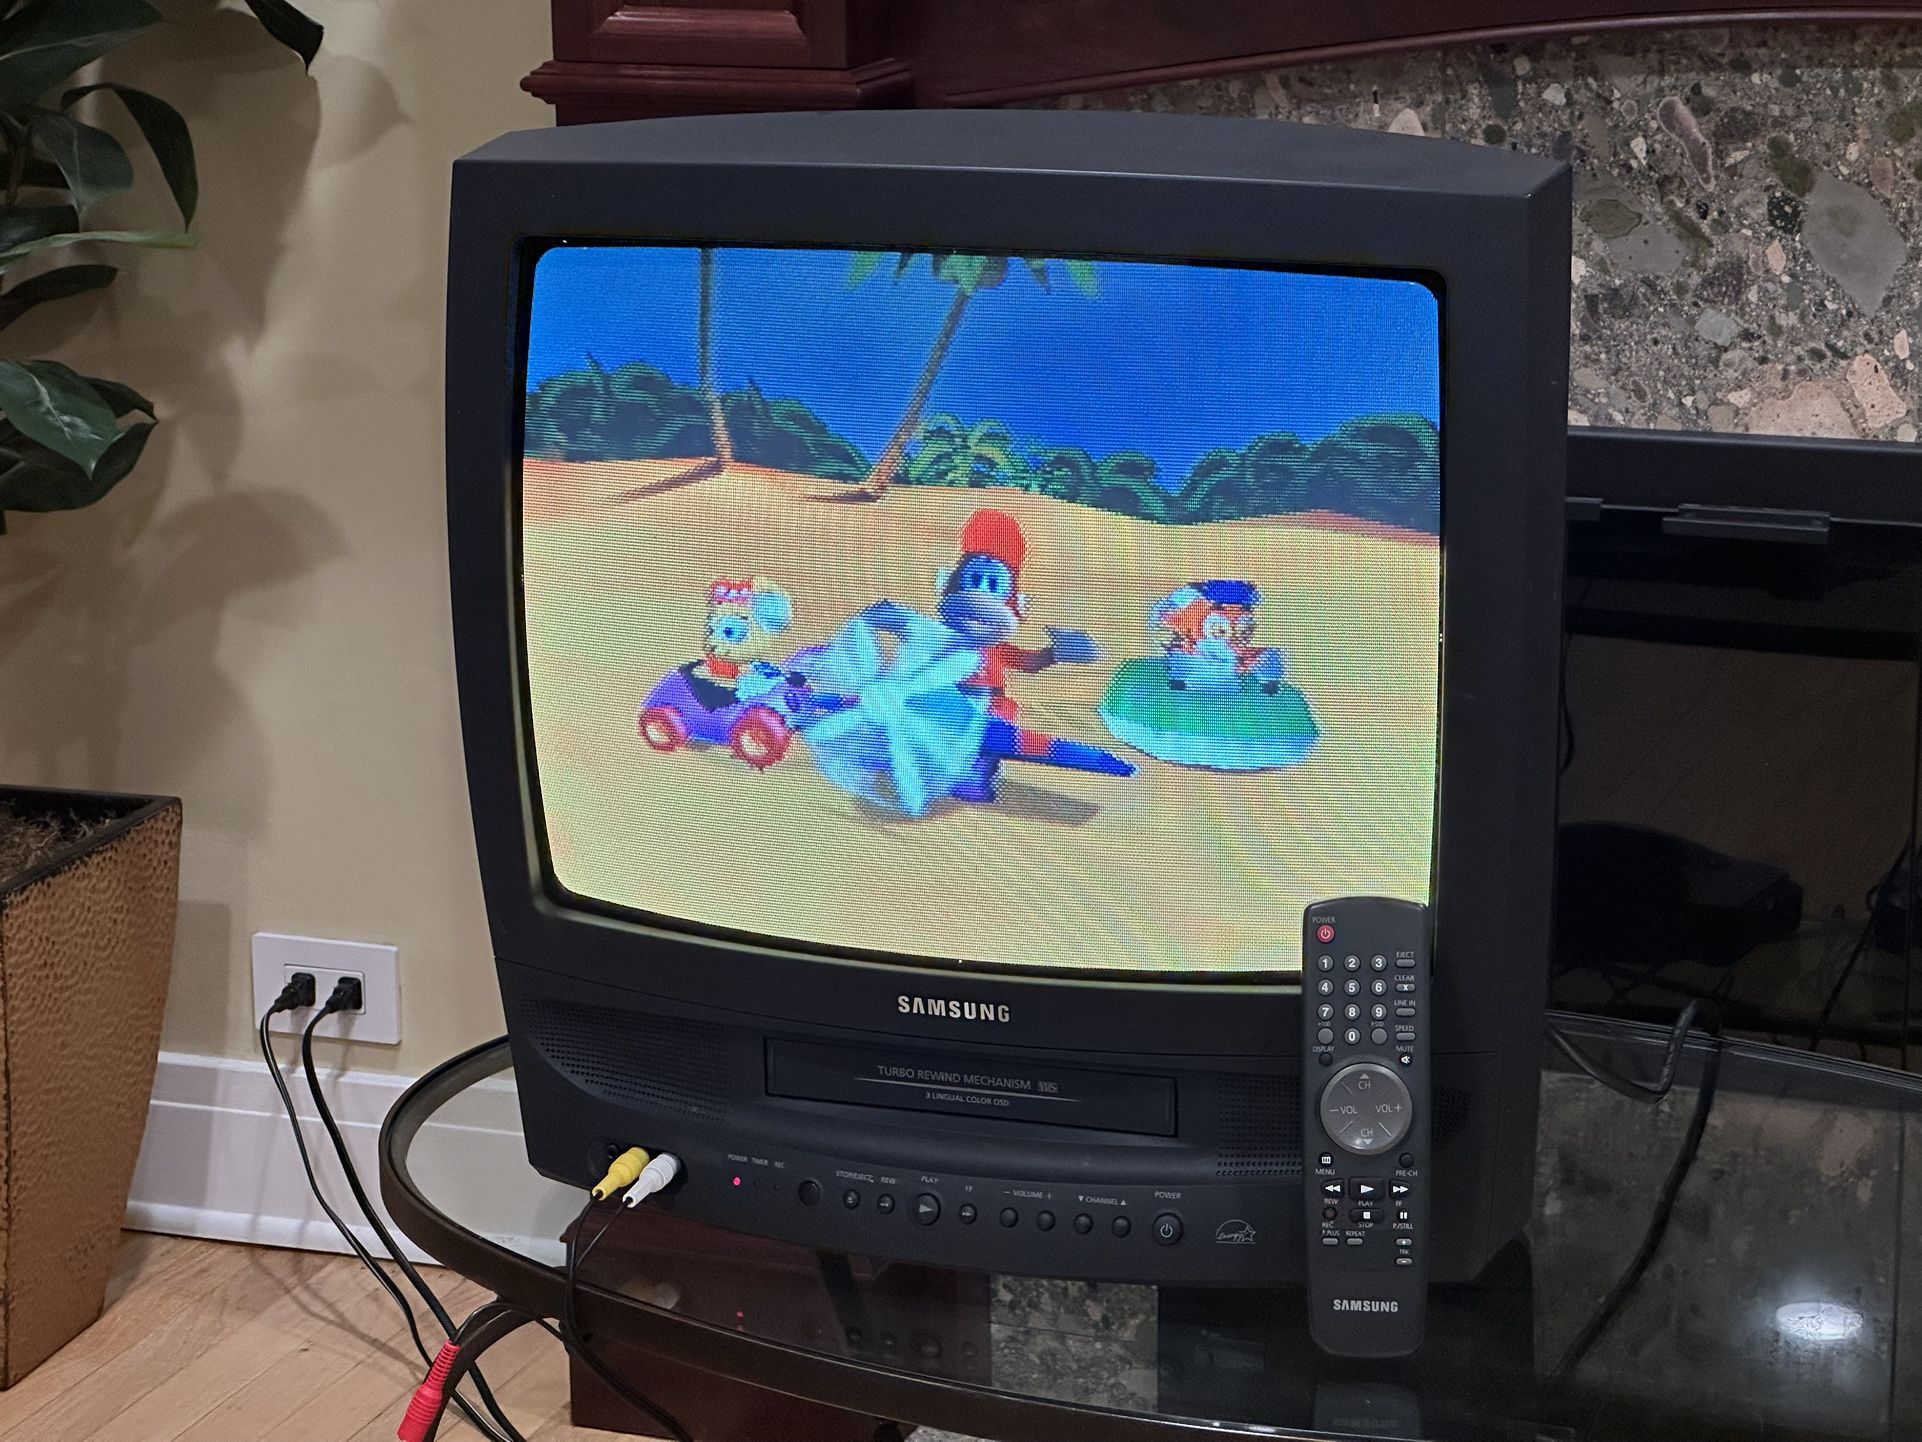 Samsung CRT - VCR Built in - 19inch -  Retro Gaming - Works Great!